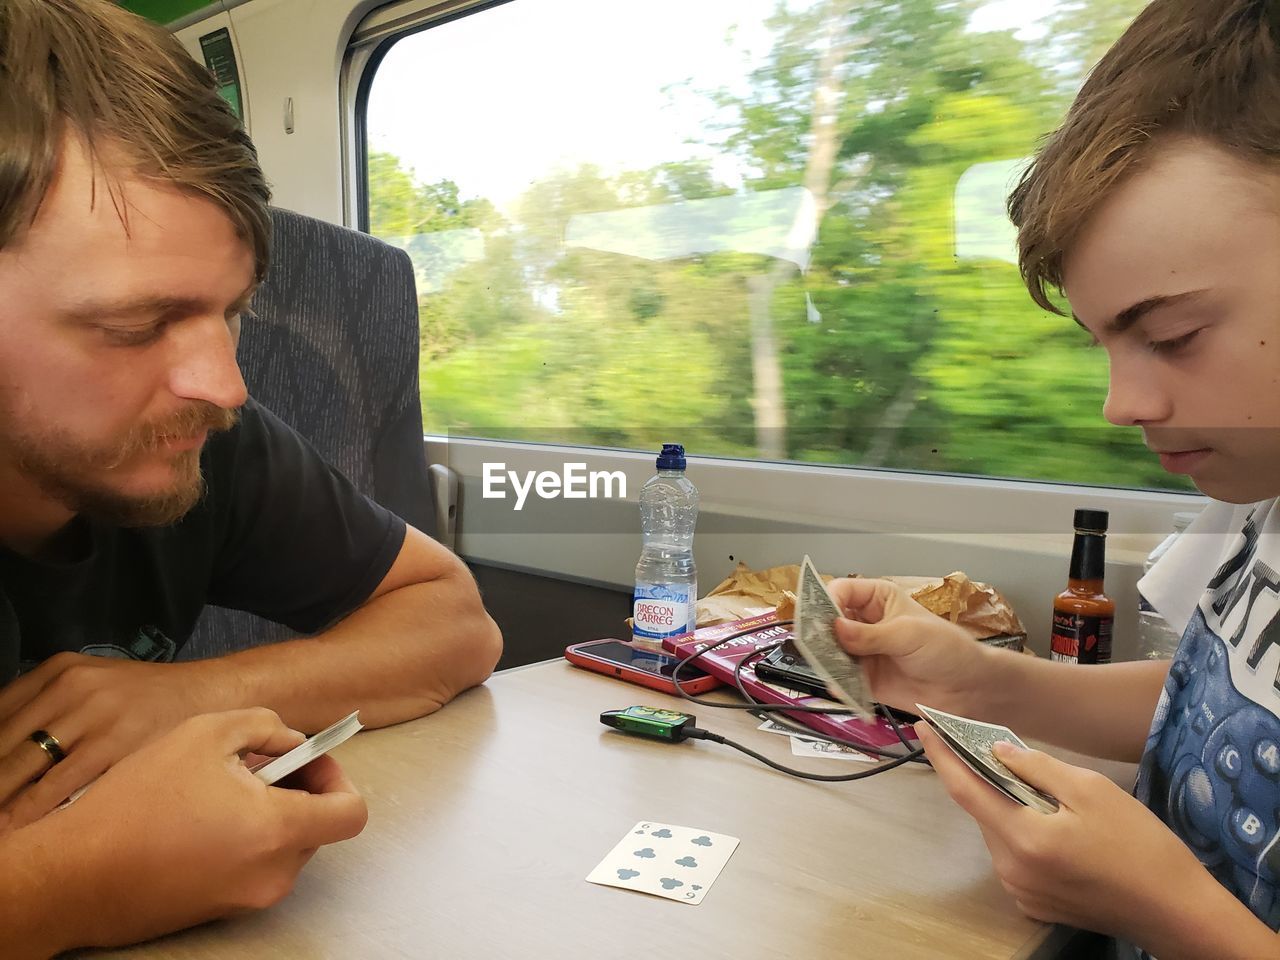 Father and son playing cards in a train